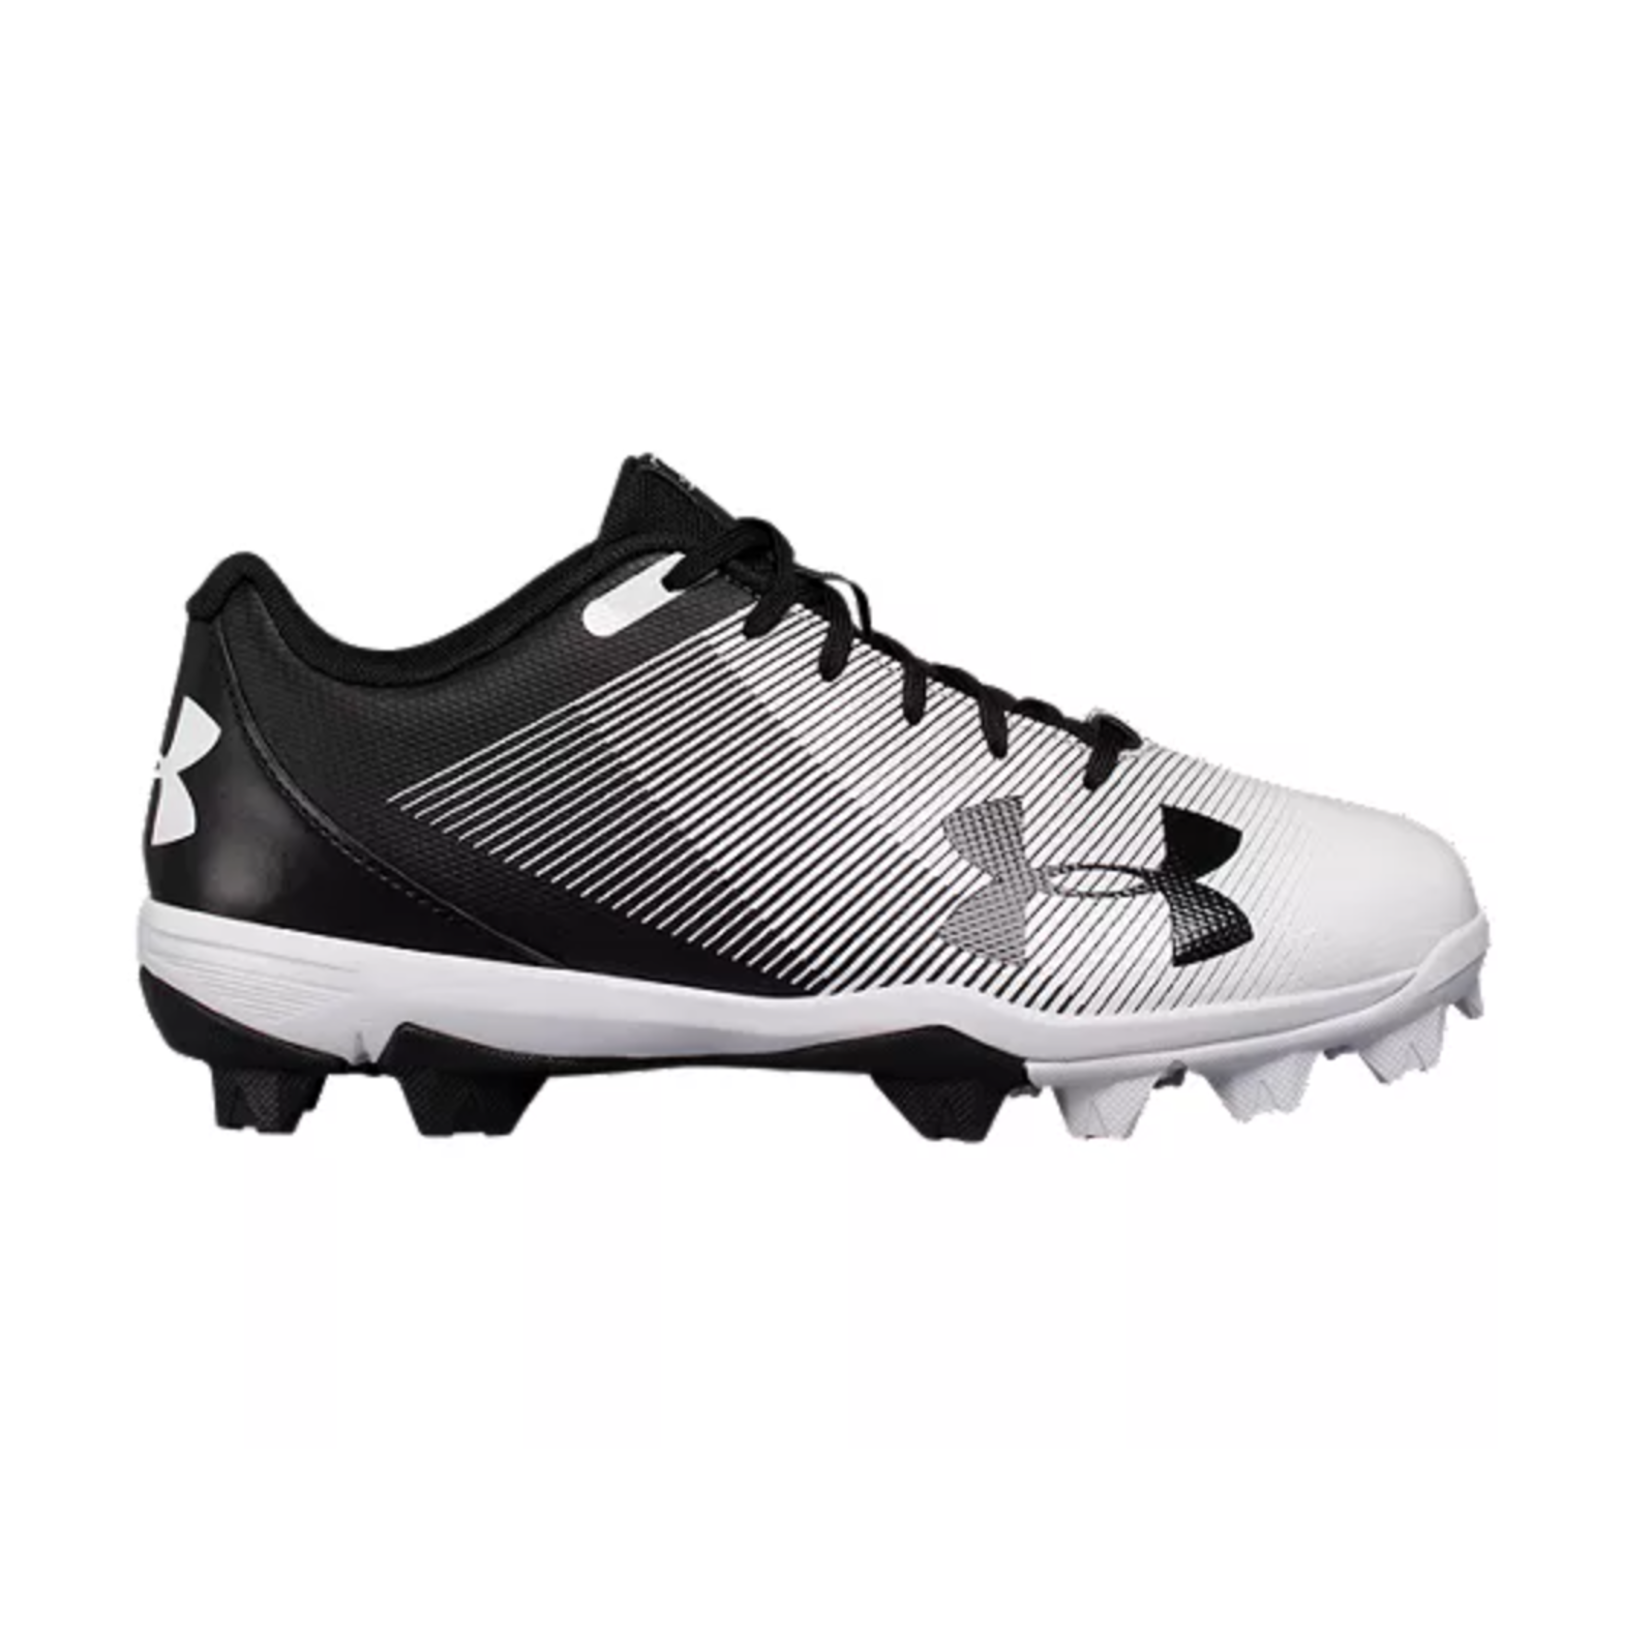 Under Armour Under Armour Leadoff Low RM Baseball Cleats